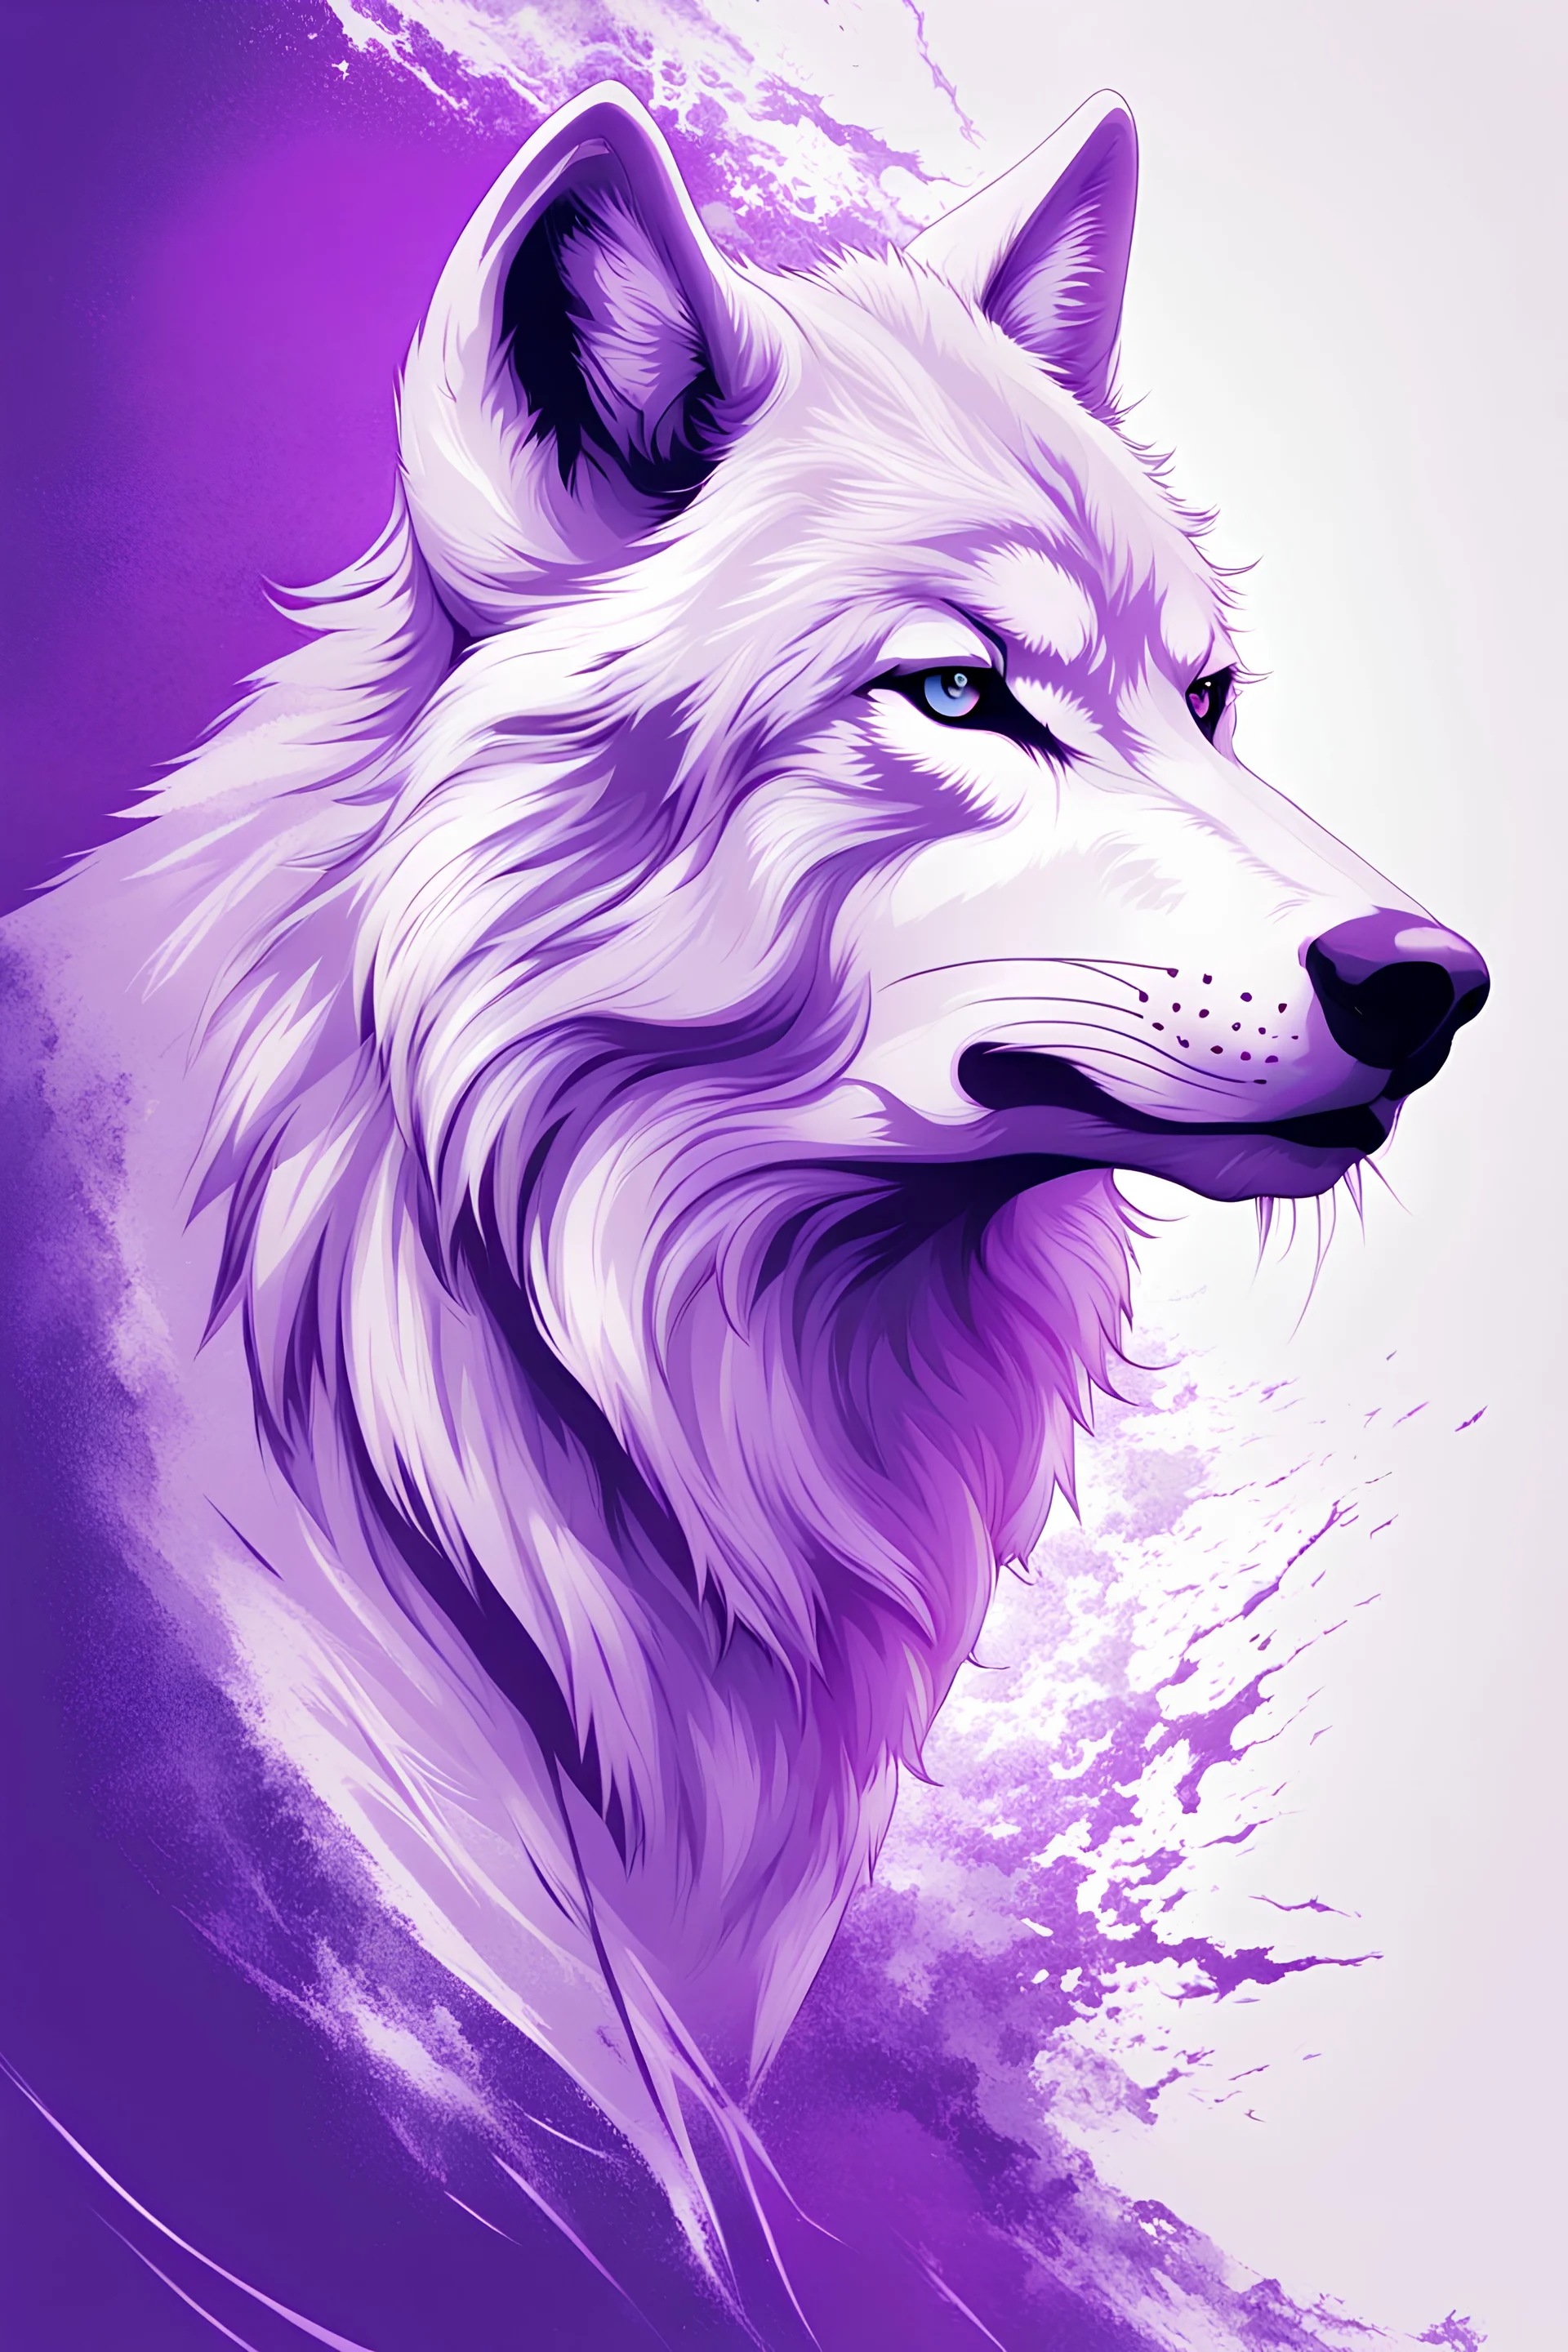 masterpiece, best quality, Siberian Wolf with purple eyes, simple logo background, in the style of japanese manga, duotone, professional quality drawing, ultra detailed, joyful lightning, only two colors purple and white with some shades, half body shot